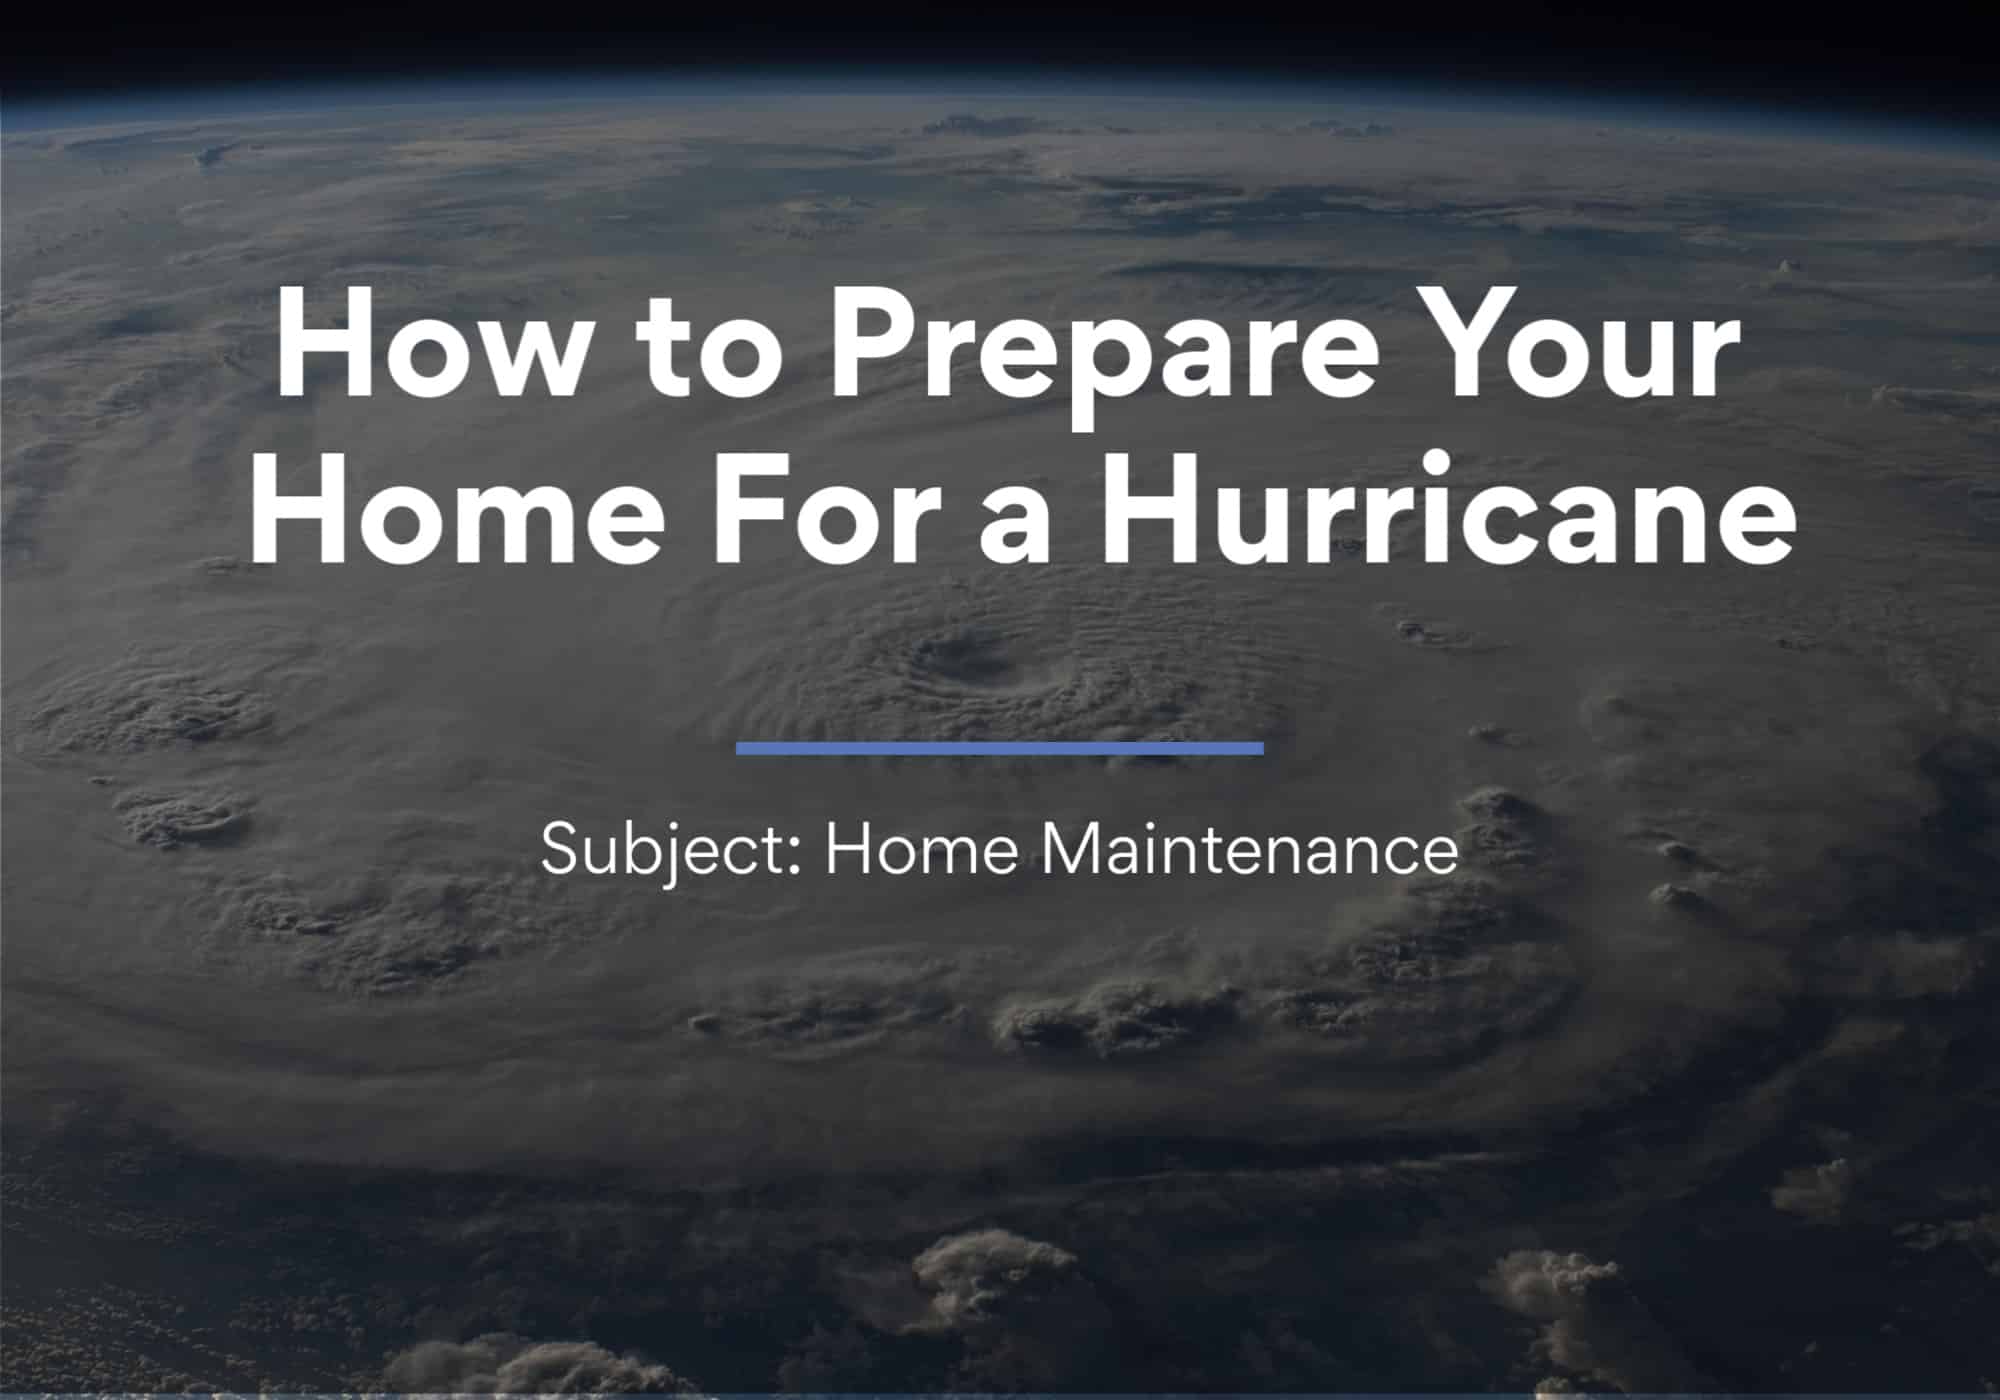 How to prepare your home for a hurricane